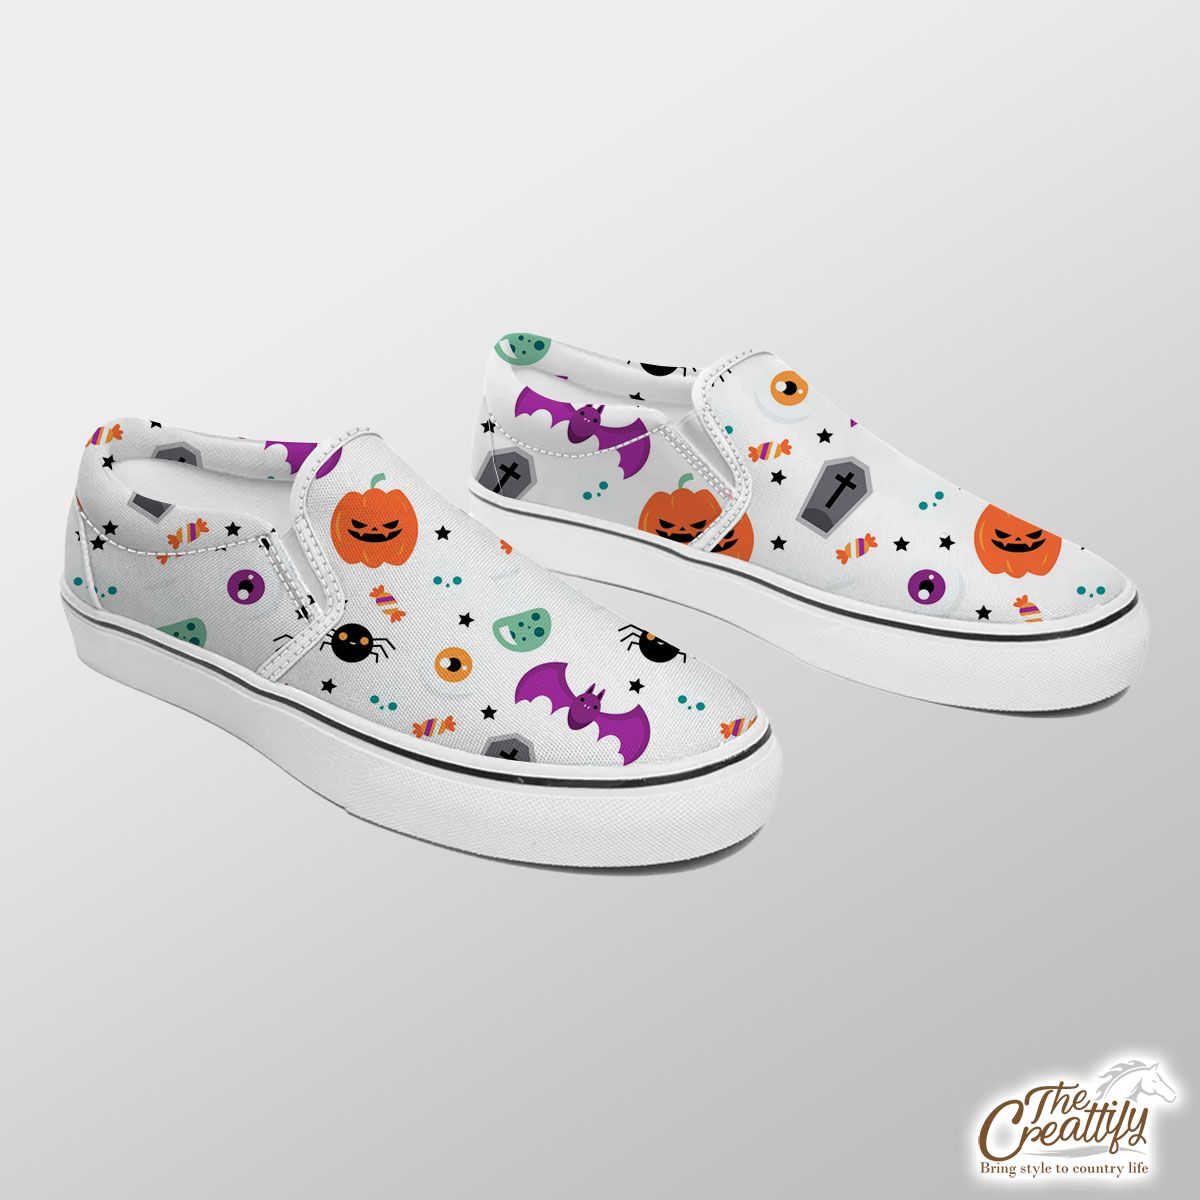 Cute Halloween Pumpkin Face, Jack O Lantern, Halloween Skeleton, Wicked Witches, Spider Slip On Sneakers